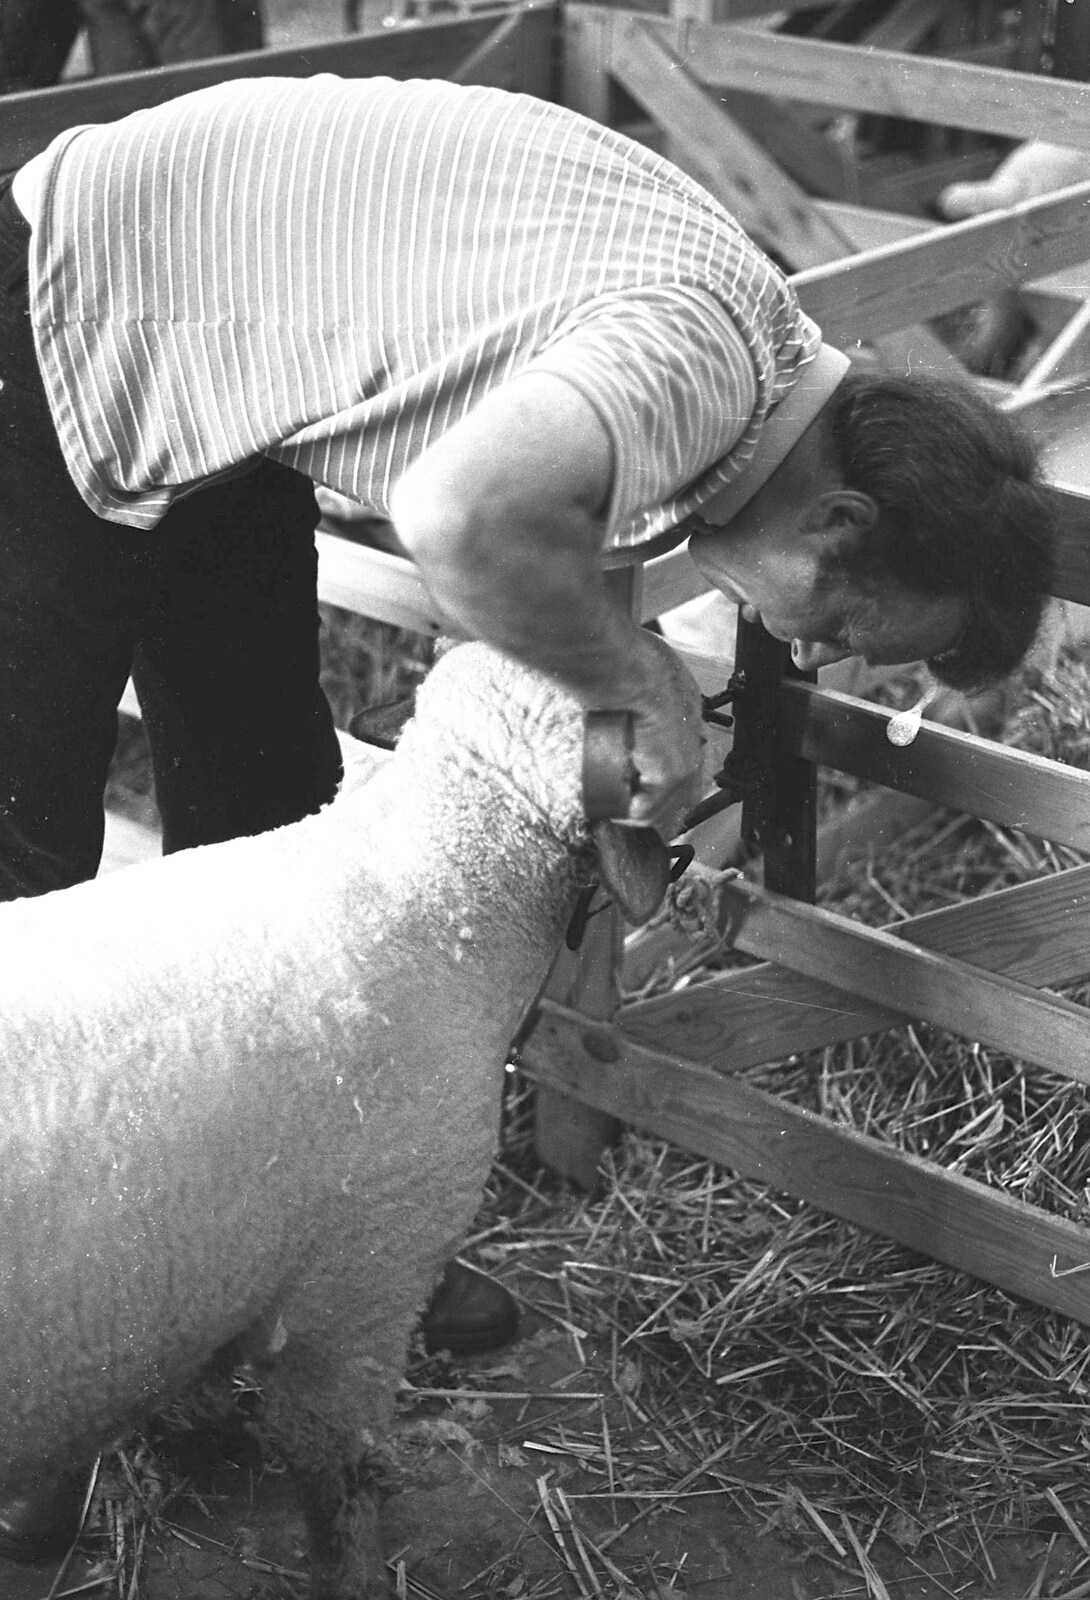 The Royal Norfolk Show, Costessey, Norwich - June 20th 1994: A sheep's mouth is inspected